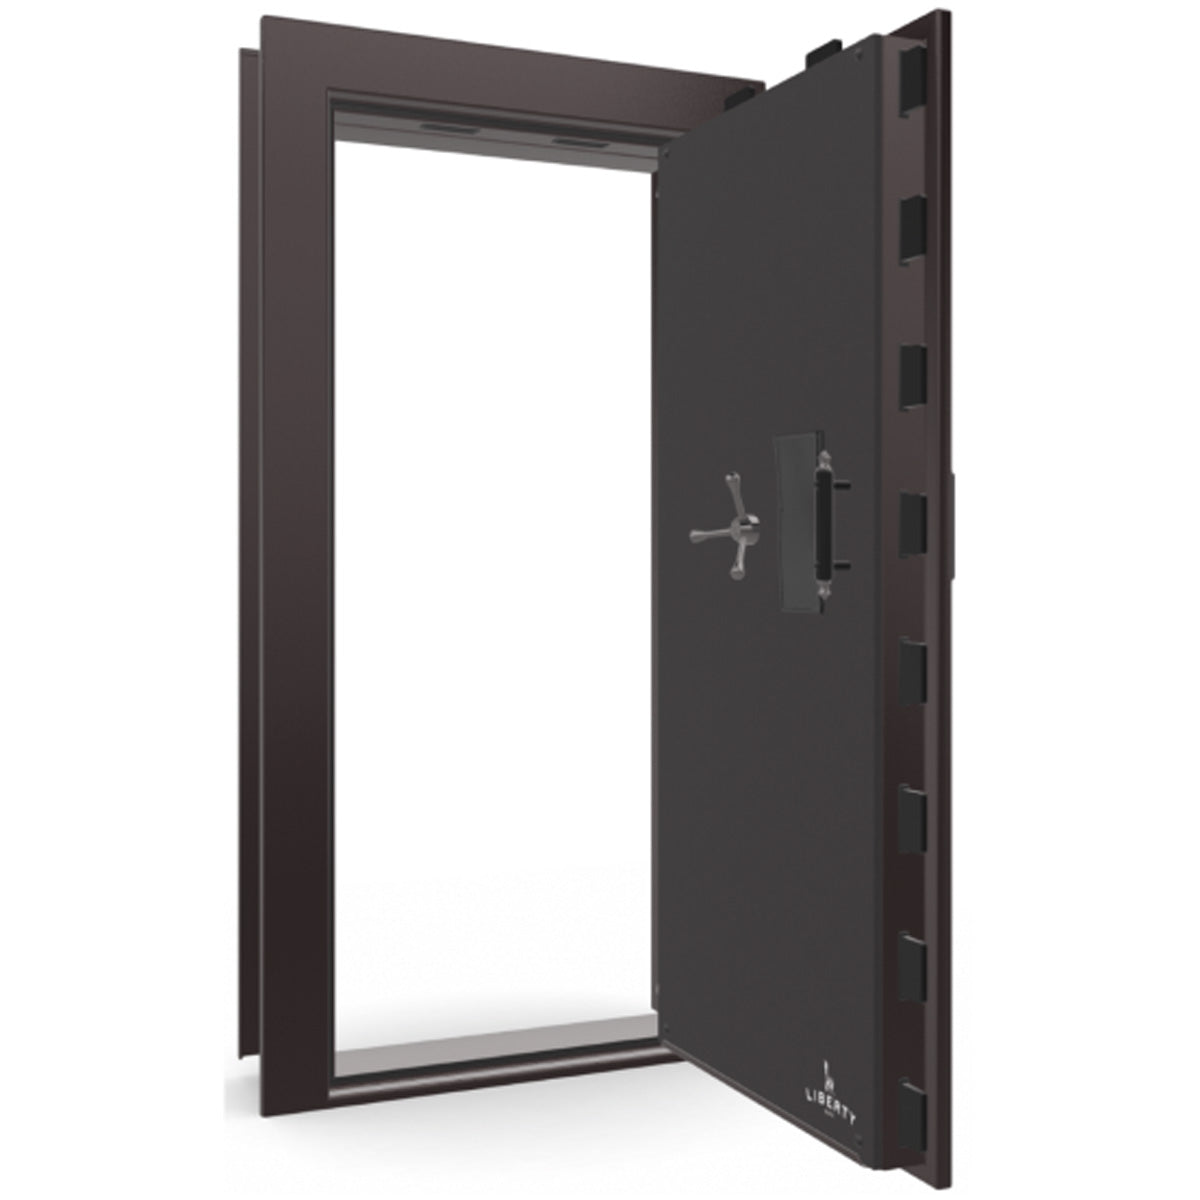 The Beast Vault Door in Black Cherry Gloss with Black Chrome Electronic Lock, Right Outswing, door open.